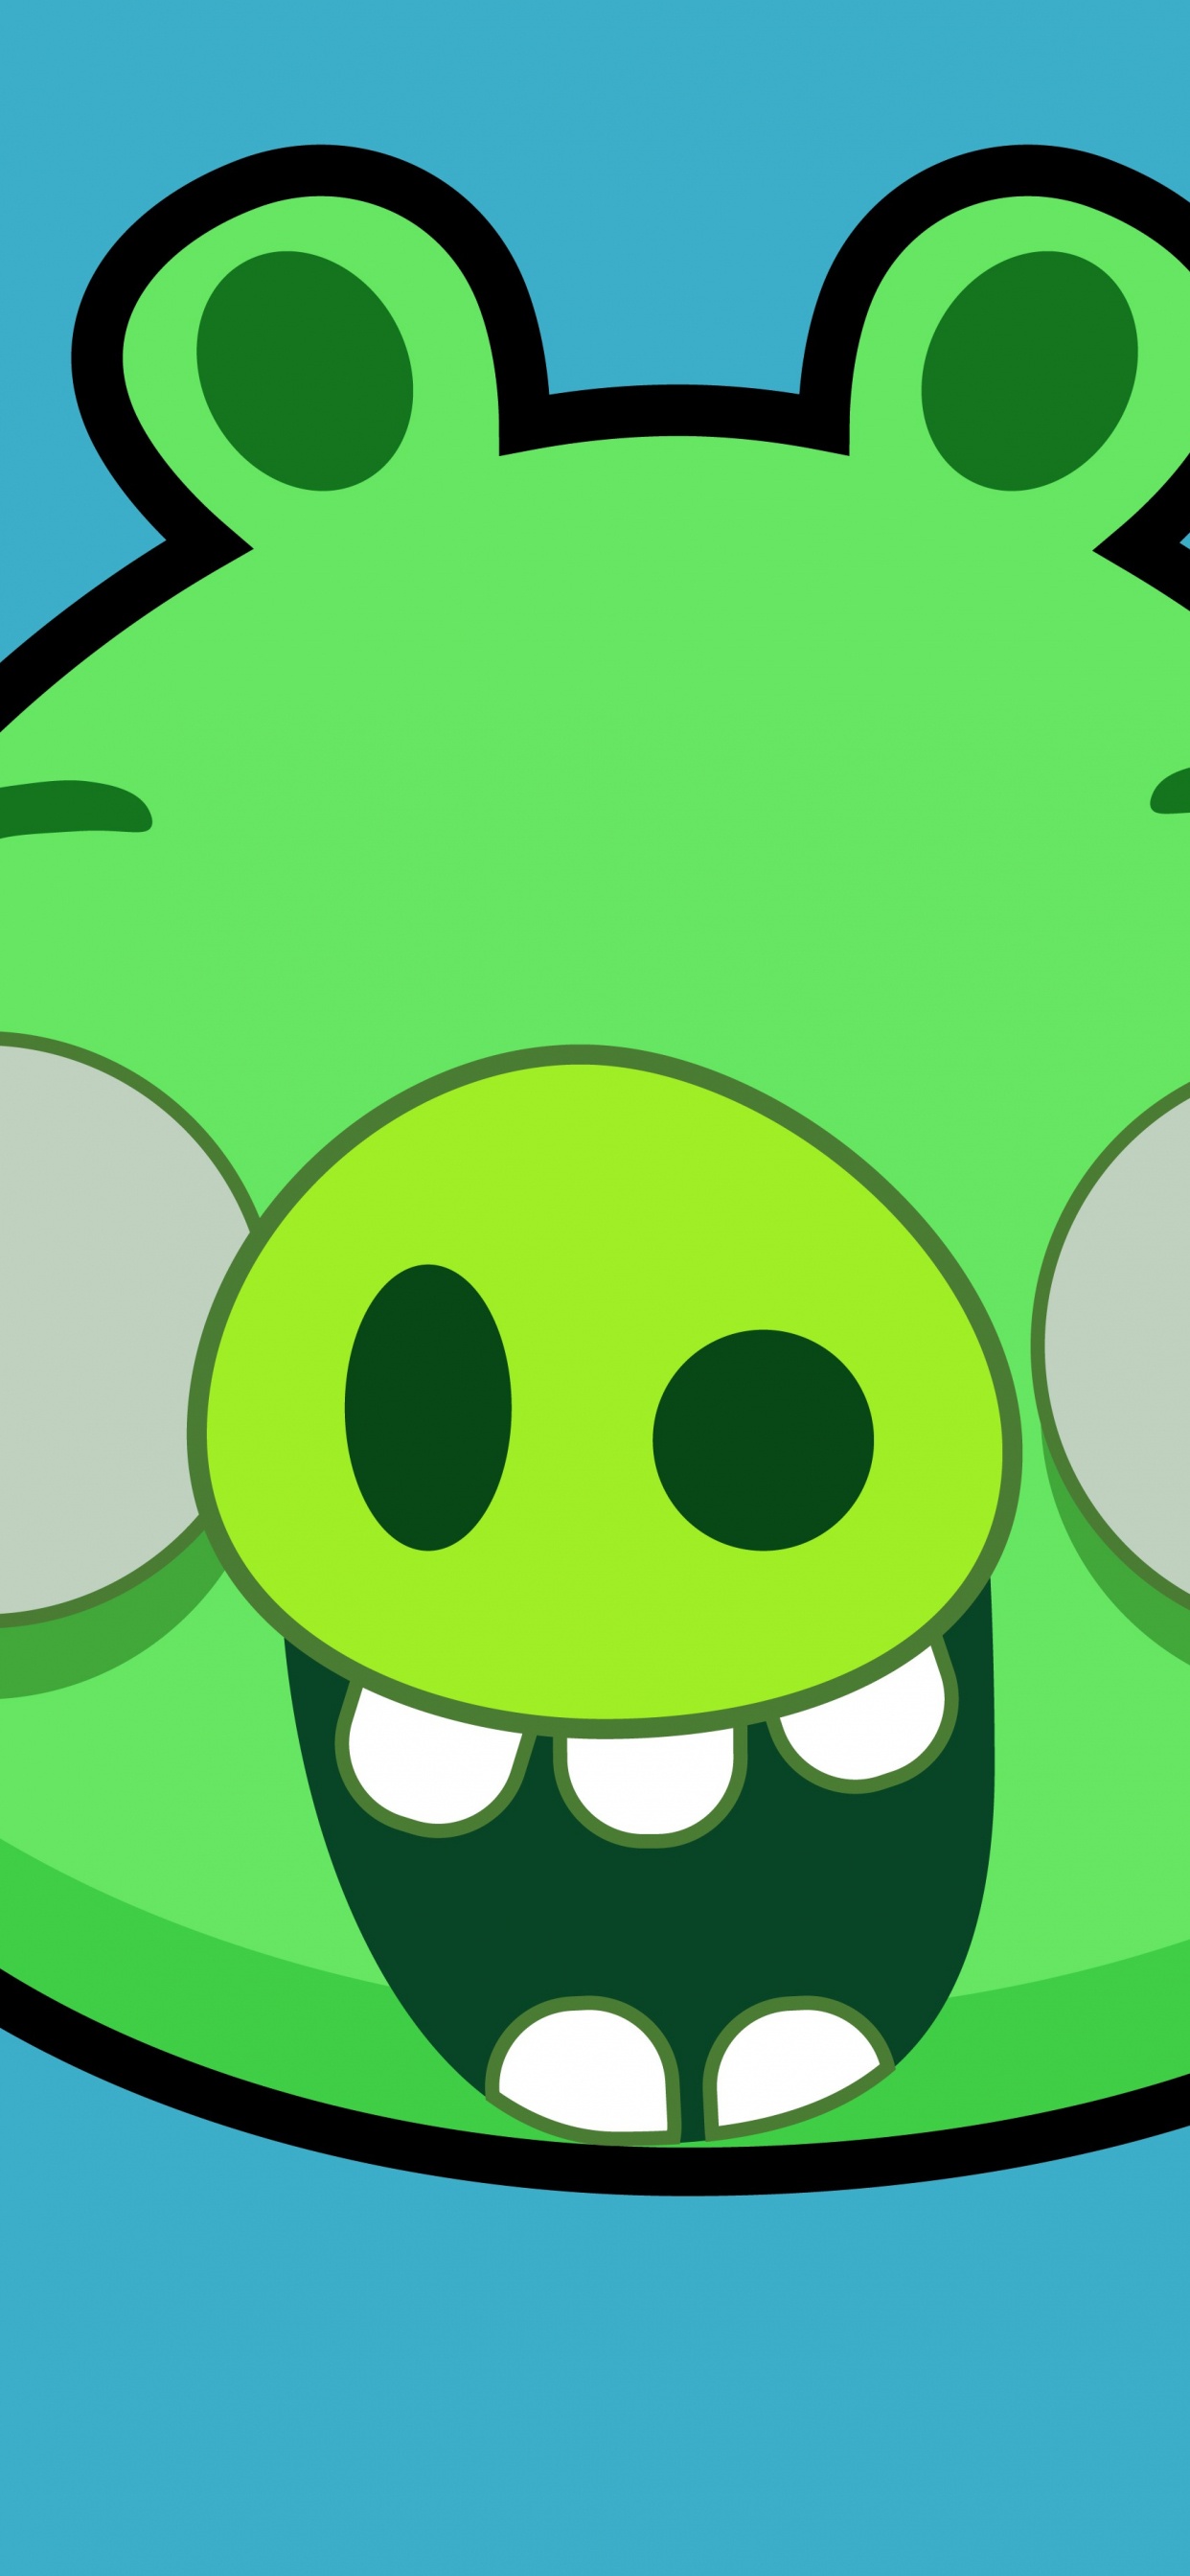 Angry Birds, Green, Cartoon, Smile, Illustration. Wallpaper in 1242x2688 Resolution